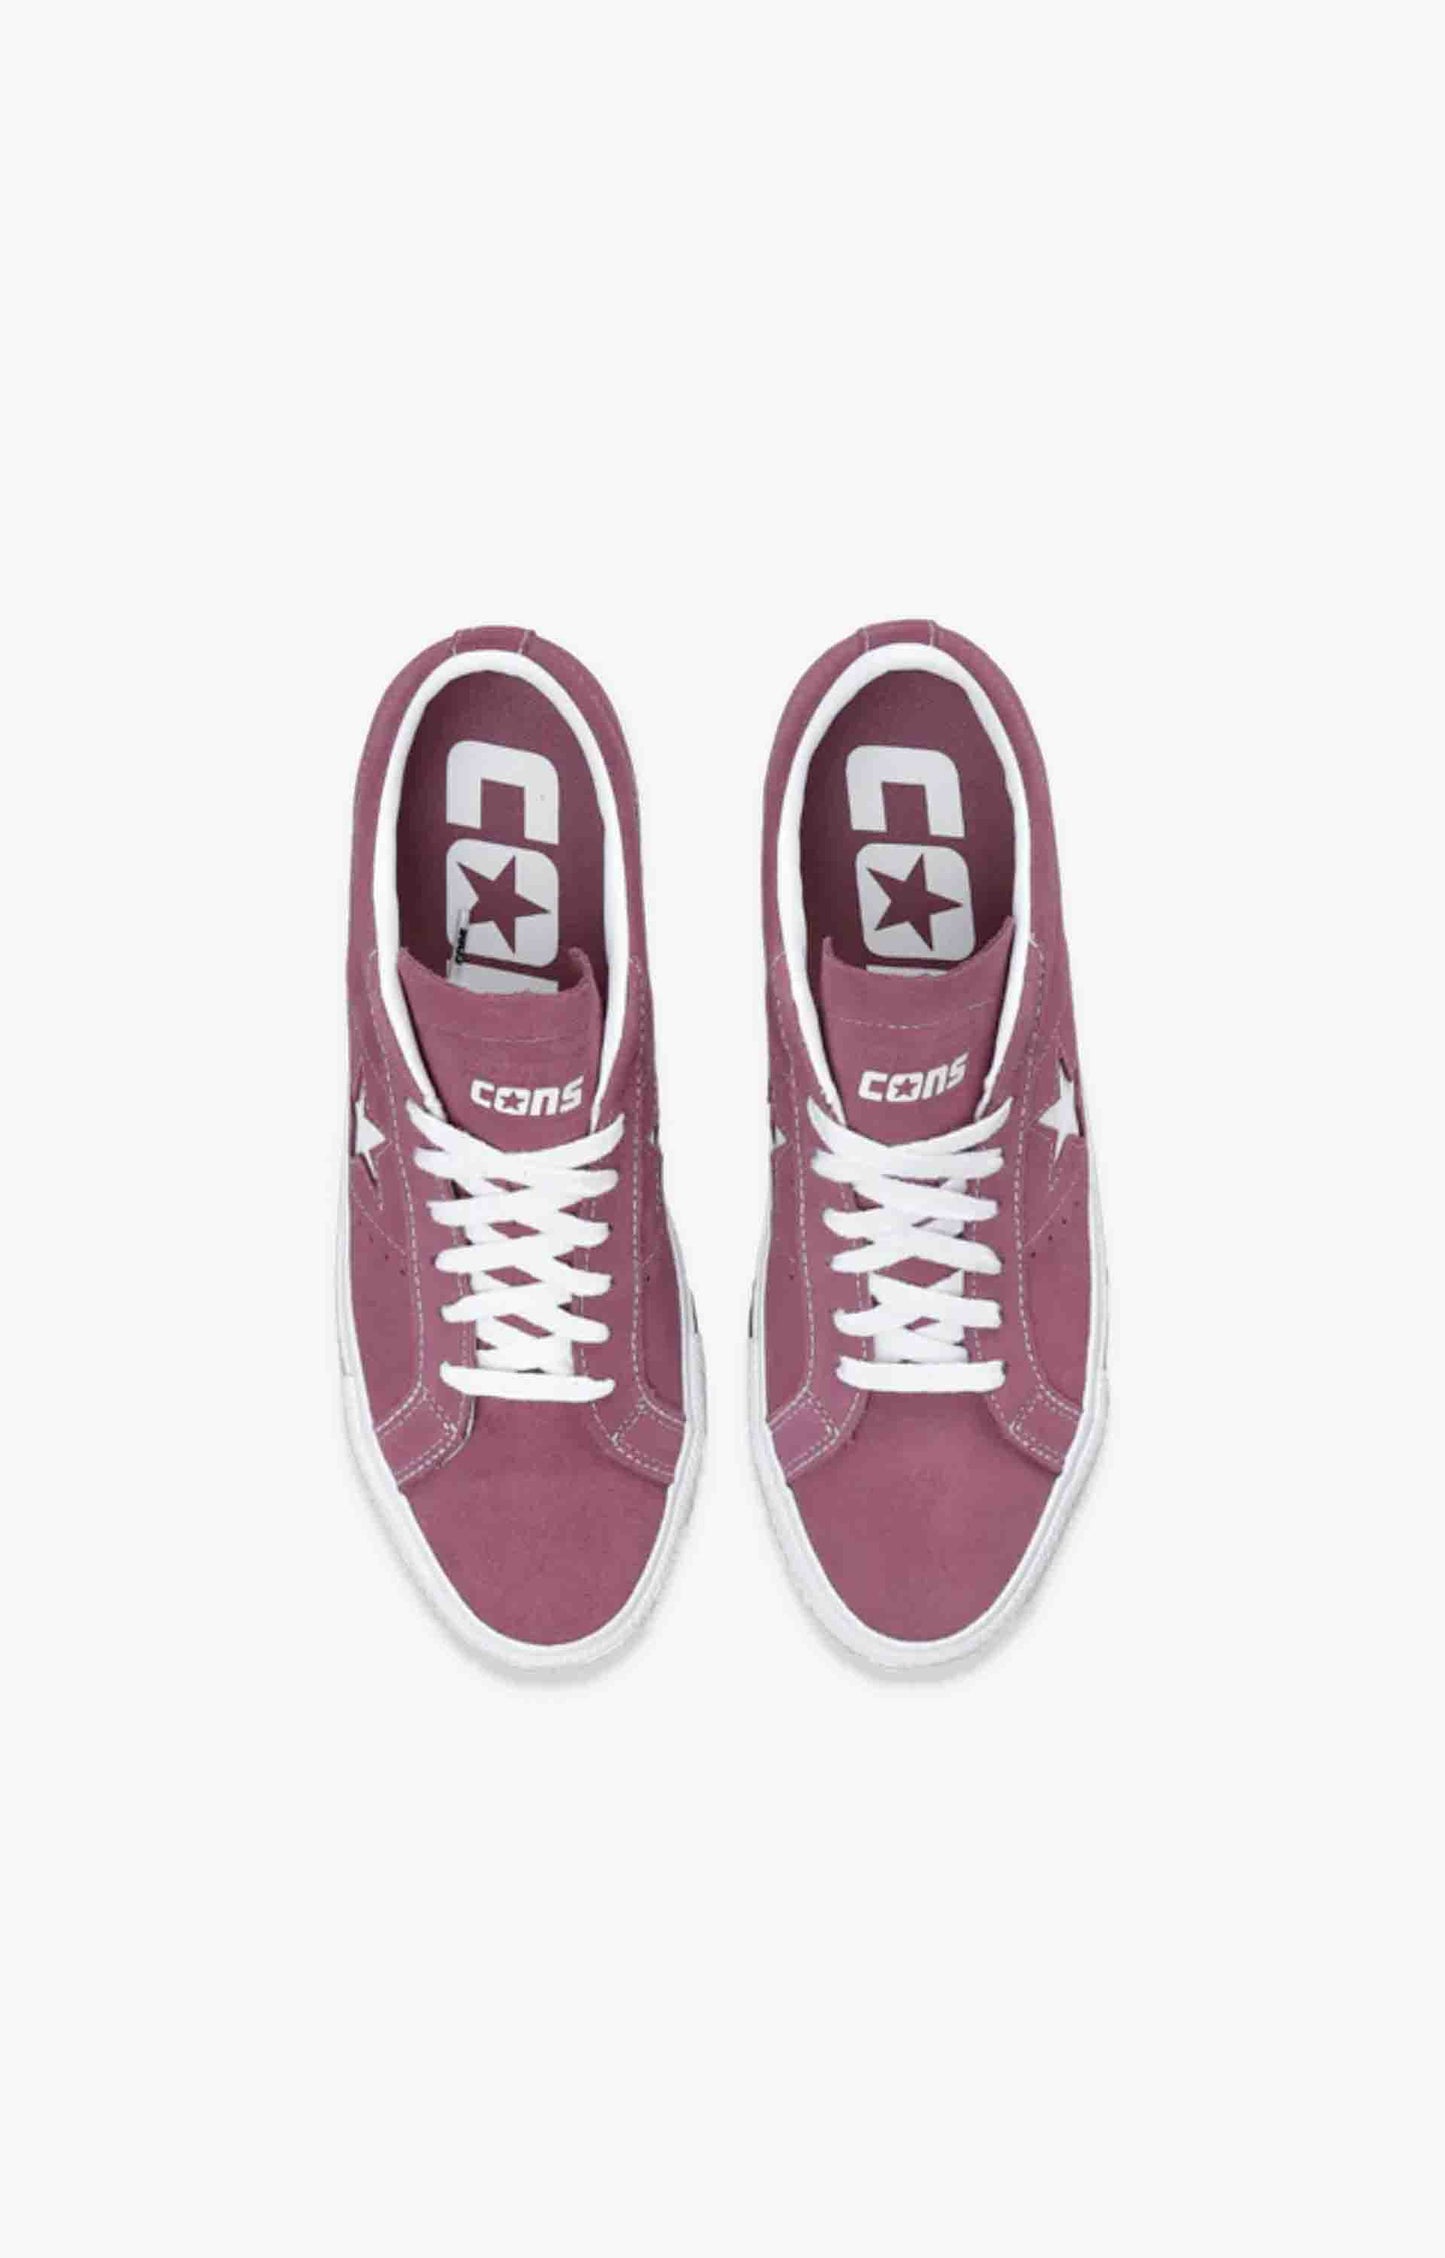 Converse One Star Pro Suede Low Mens Shoe, Shadowberry